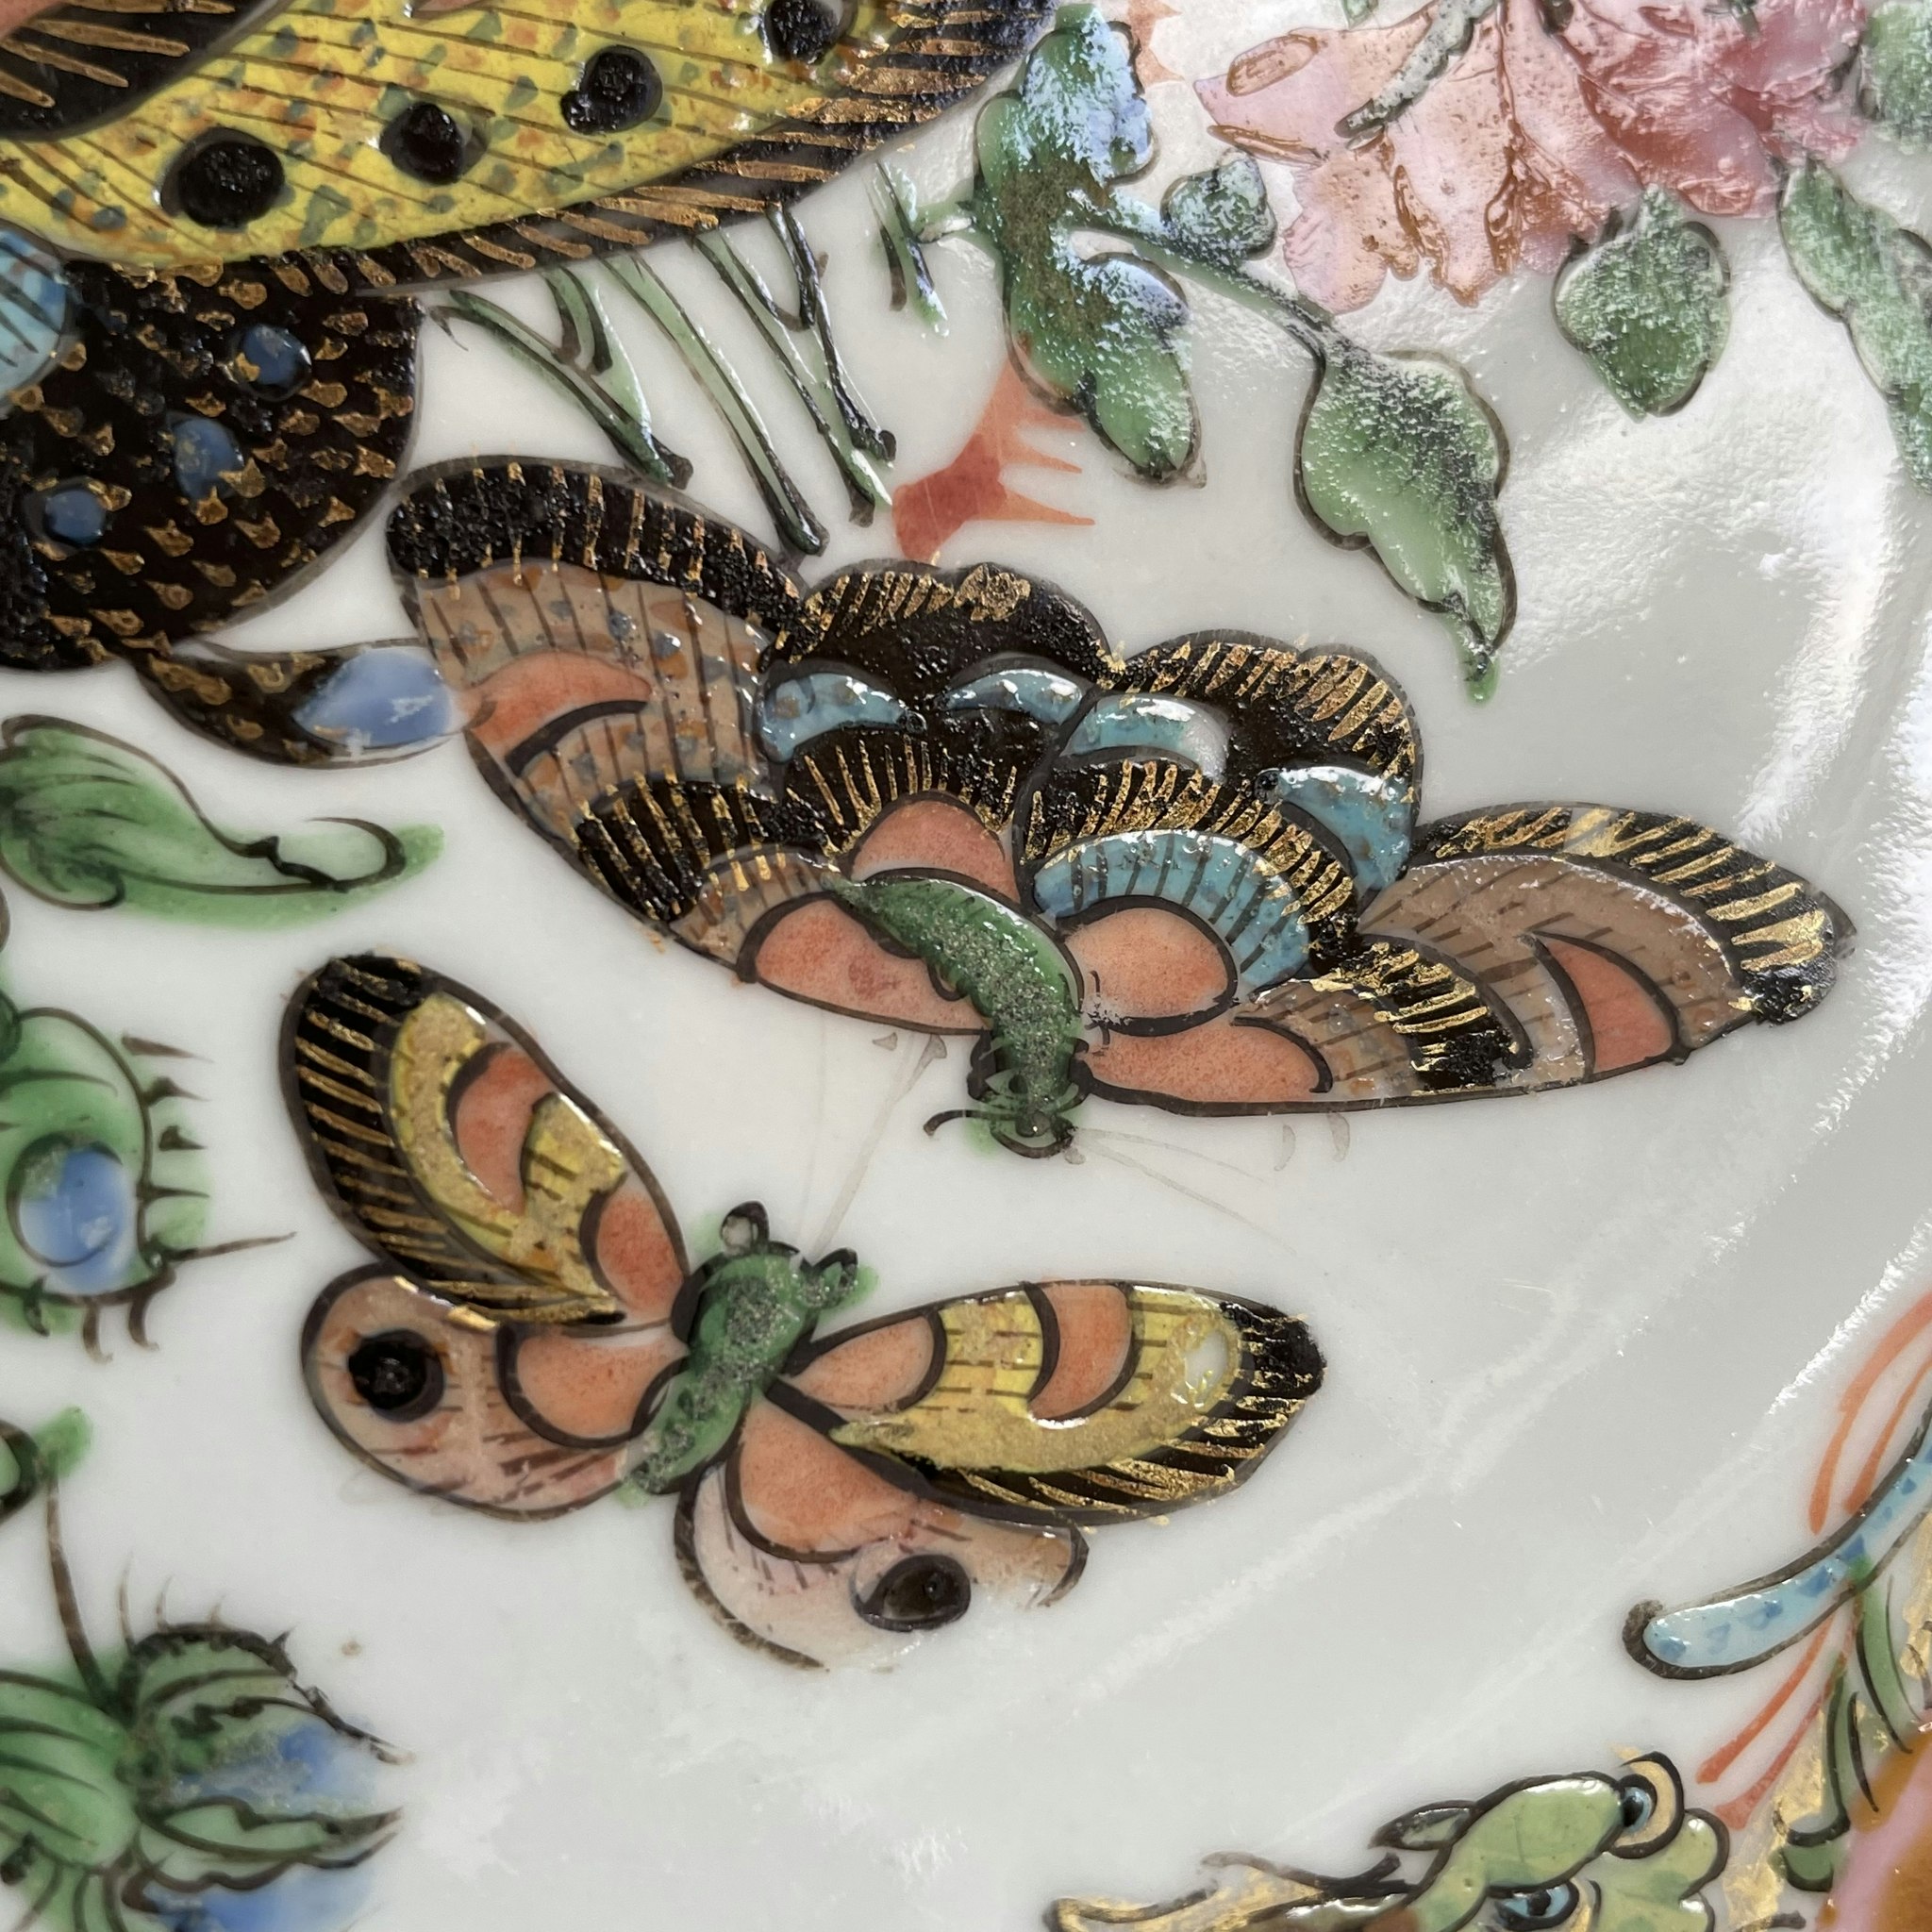 Chinese Antique Rose Butterfly Plate, Late Qing Dynasty, 19th Century #1639